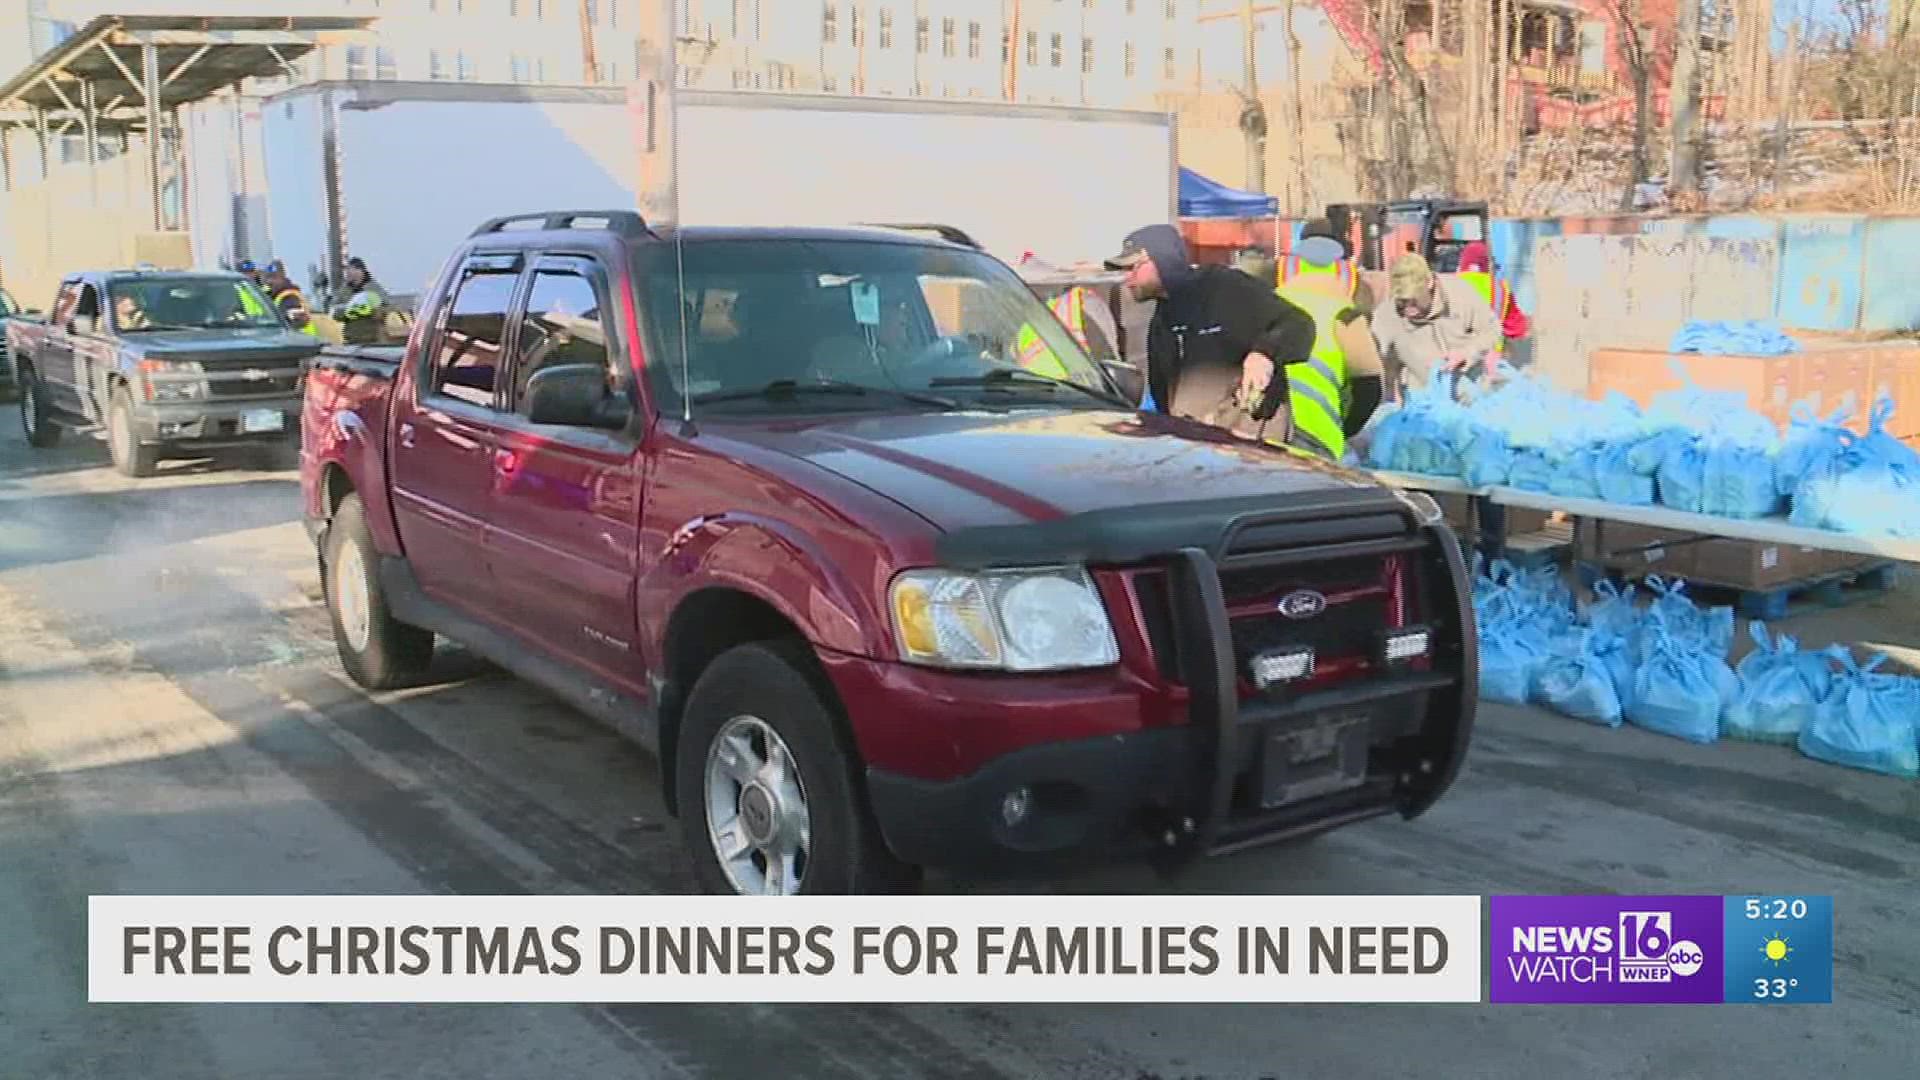 A drive-thru food distribution provided over 600 families with Christmas Day meals.